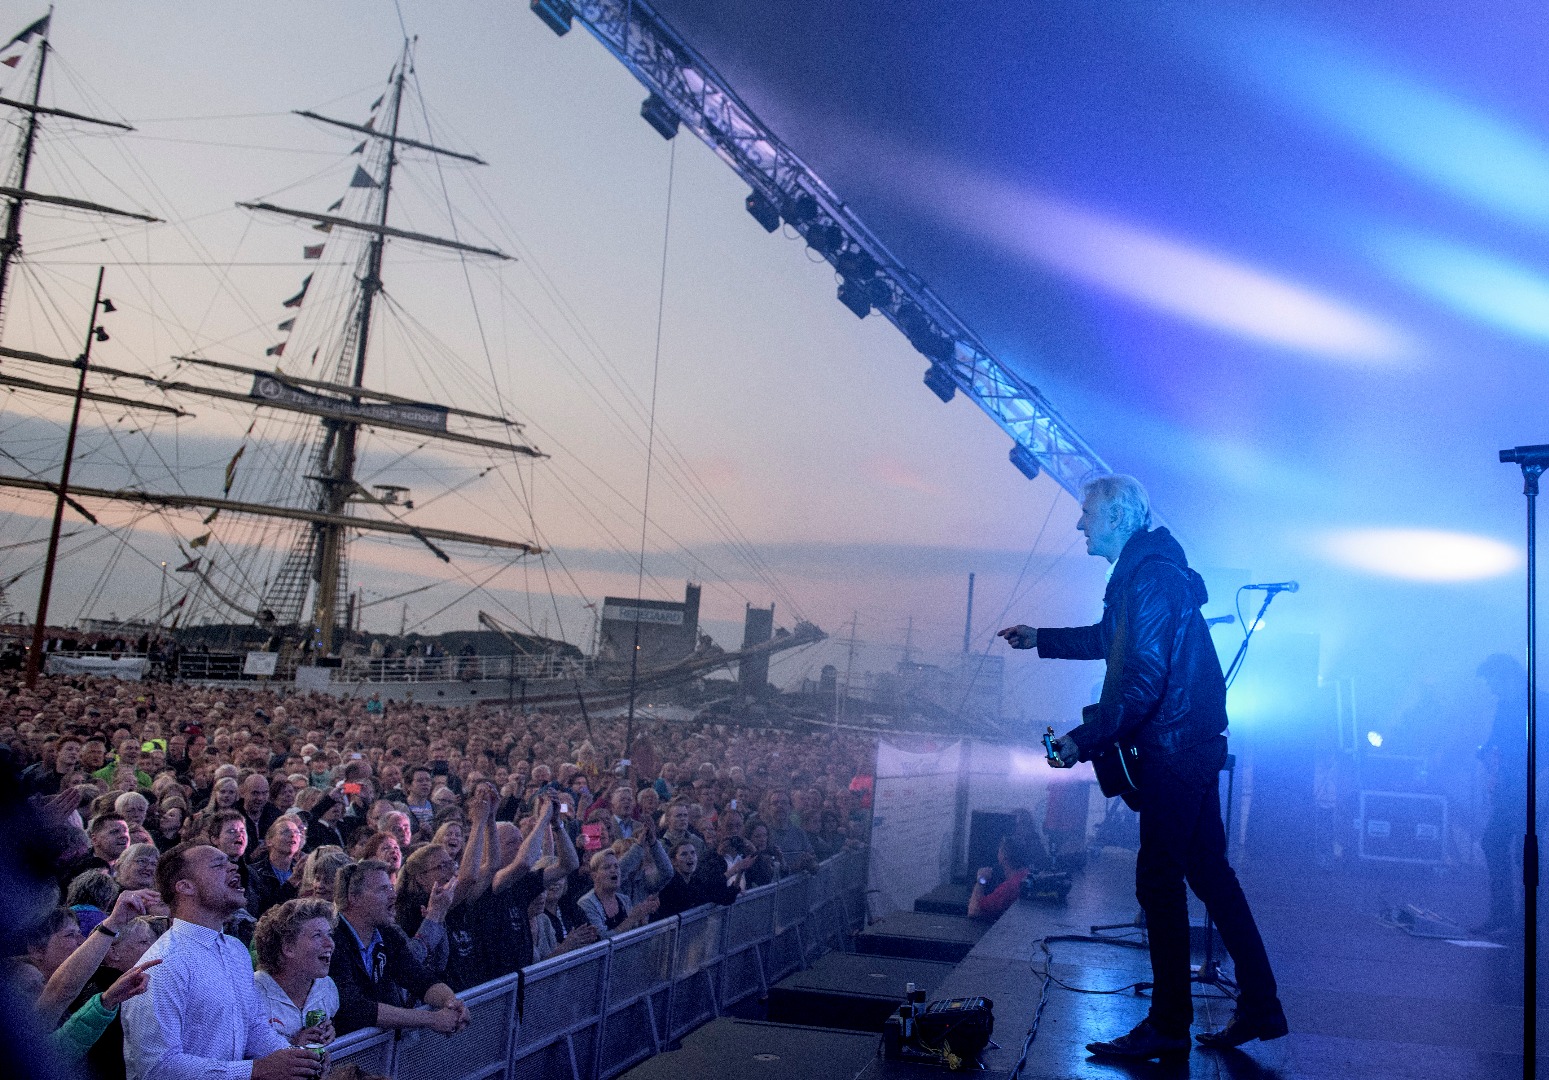 The Tall Ships Races 2015 Aalborg